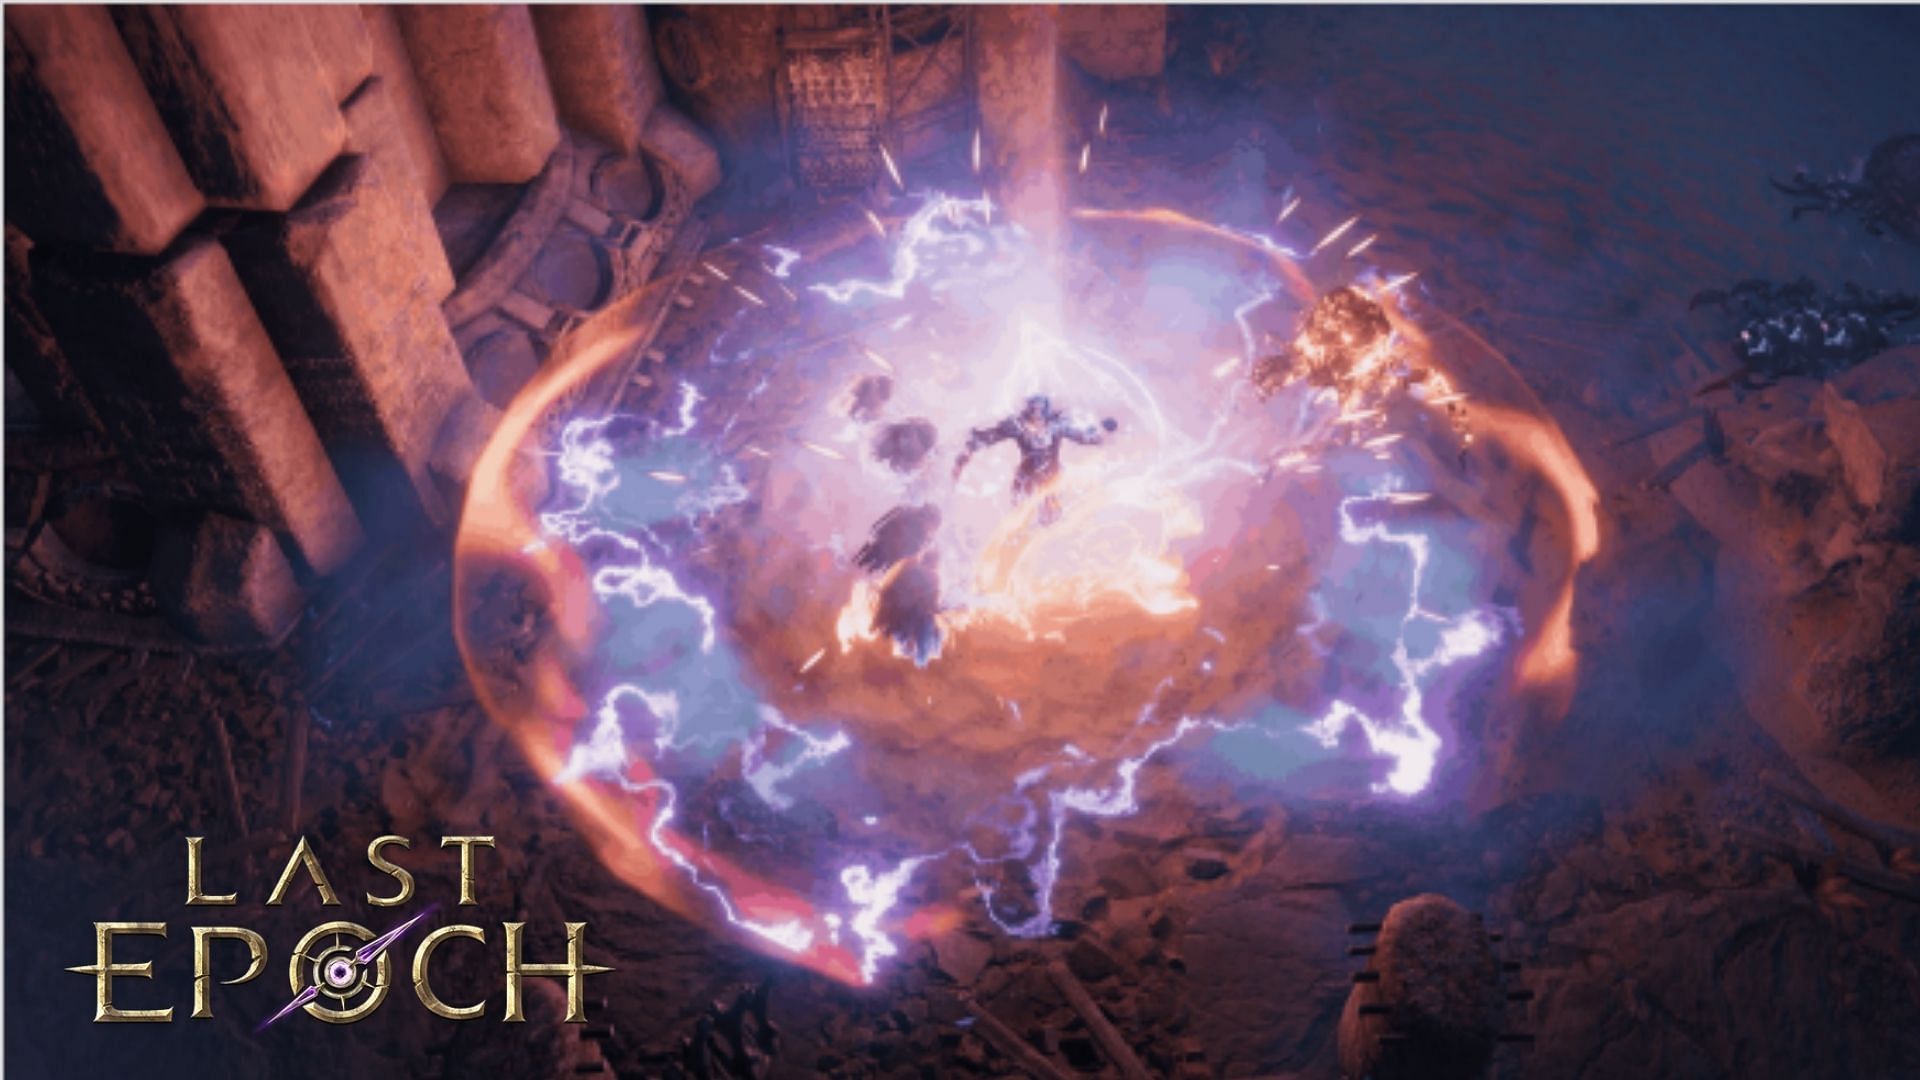 The max level you can reach in Last Epoch is 100 (Image via Eleventh Hour Games)